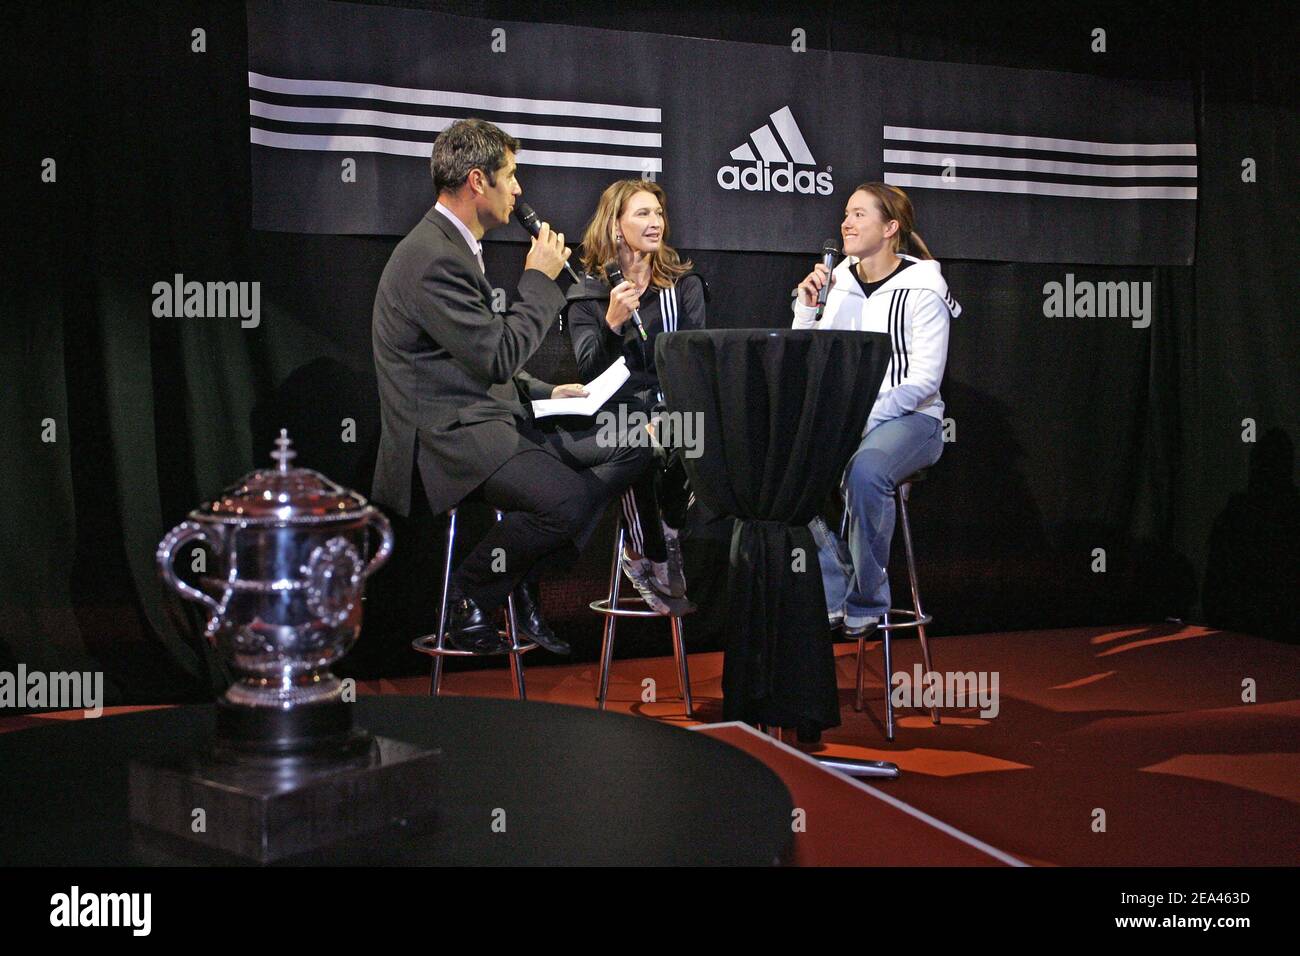 Adidas presents Grand Slam Winners and WTA Number one tennis players Steffi  Graf and Justine Henin-Hardenne to meet at adidas interactive Area and  celebrate their inspiring 'Impossible is Nothing' story at Roland